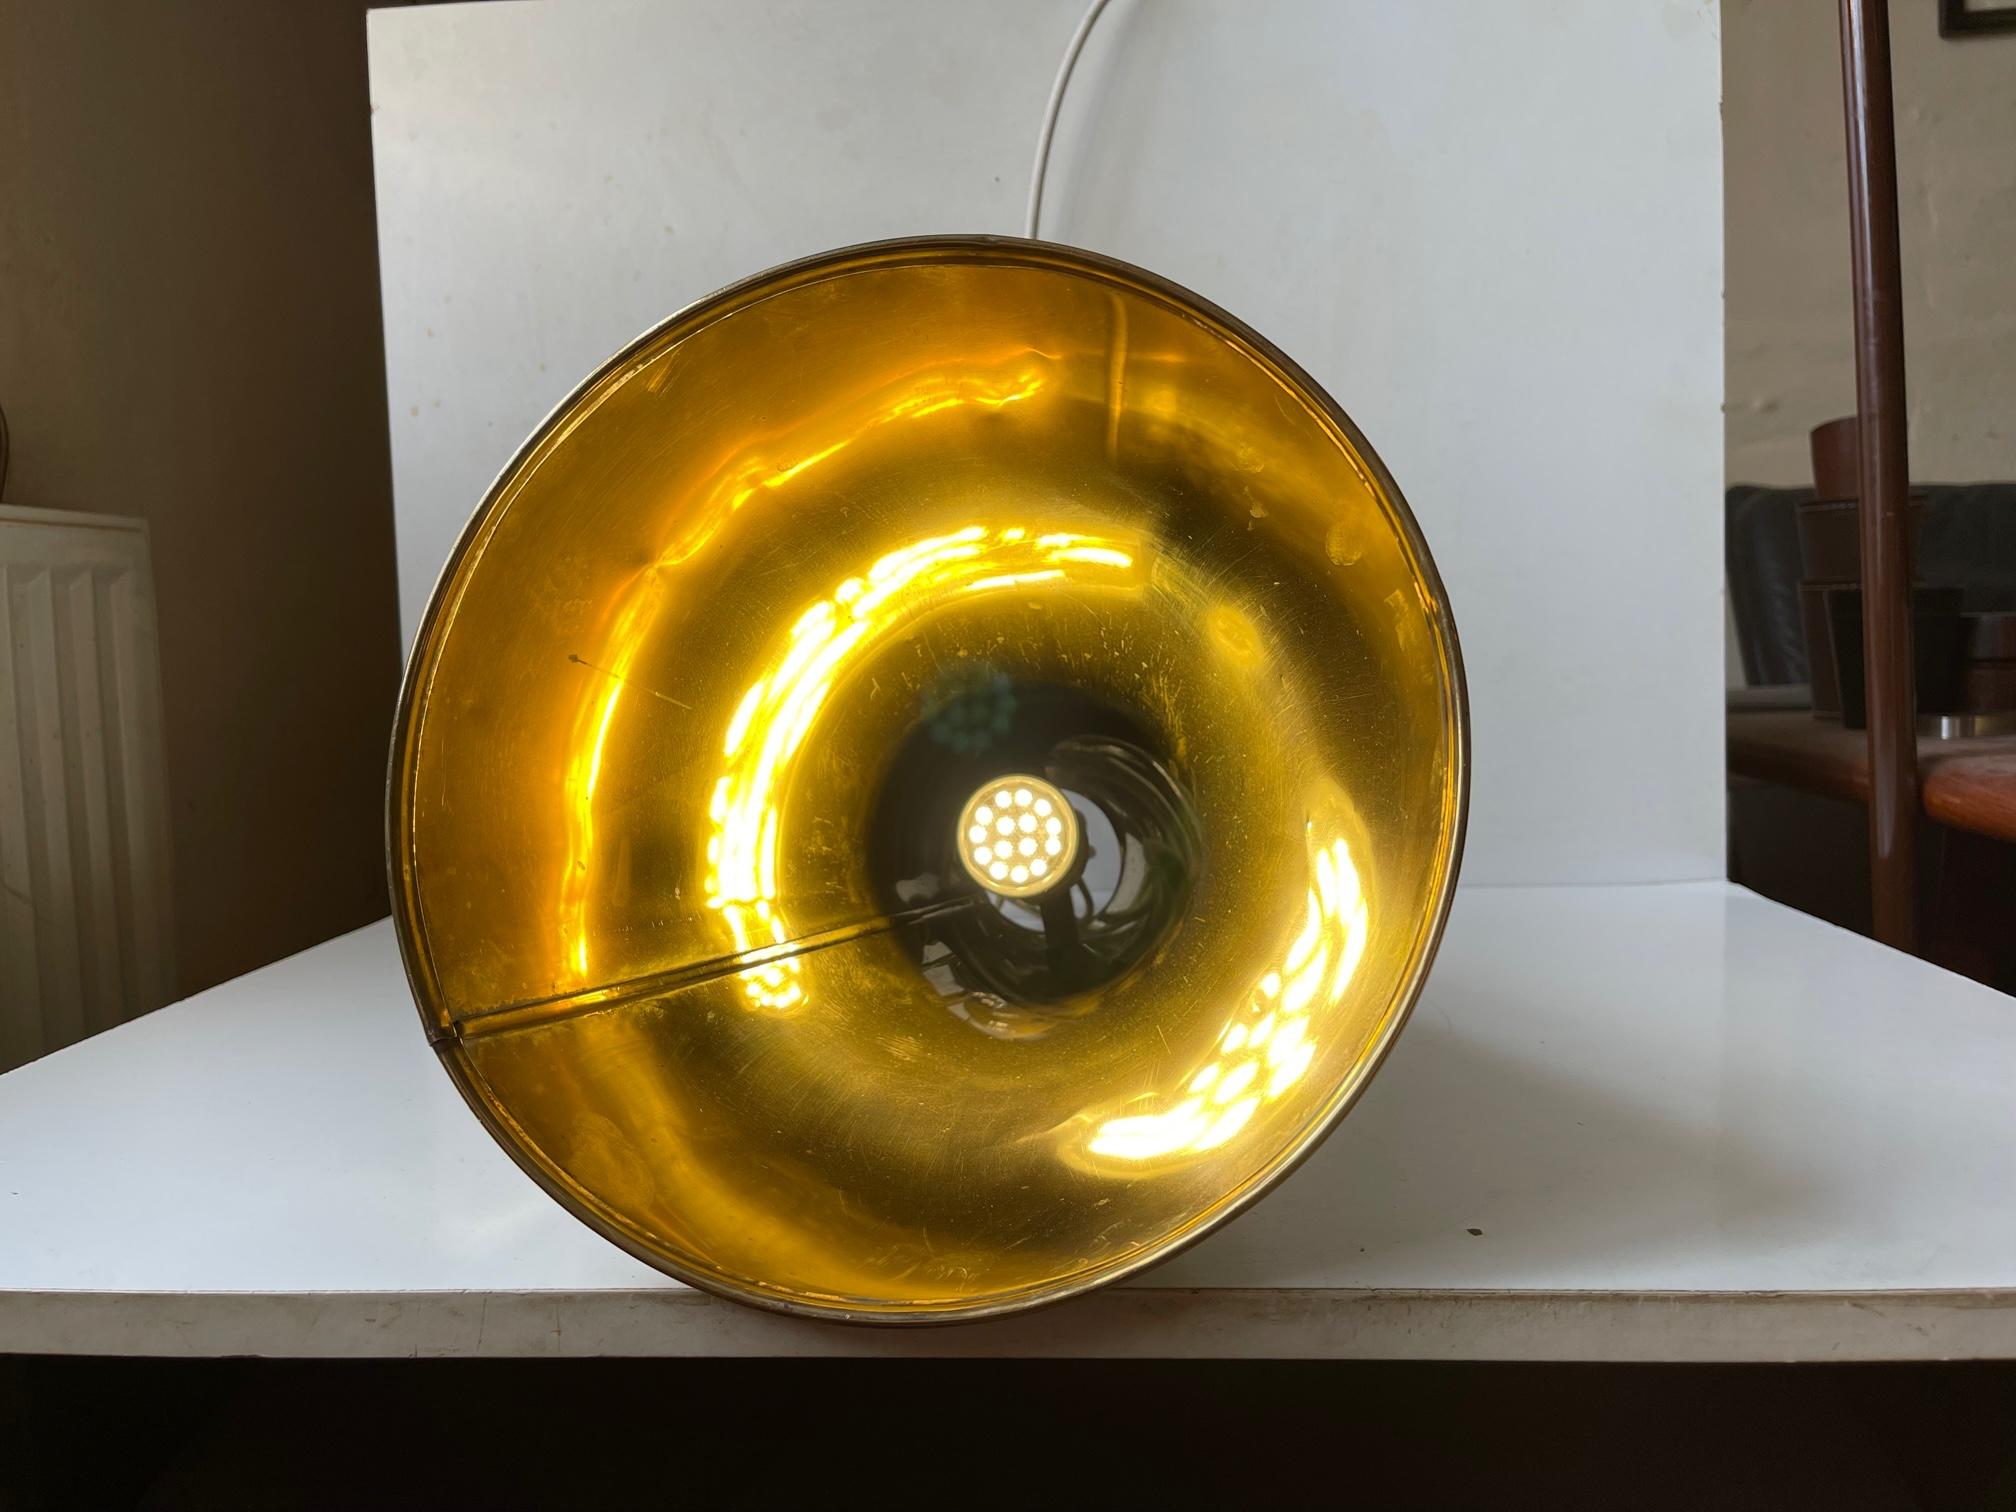 Old stylish yachtsmans megaphone in solid brass converted in to a chain-suspended ceiling lamp during the 1960s or 70s. Probably from Delite in Denmark. Without chain the pendant measures 41 cm in height and has a diameter of 25 cm at the bottom.